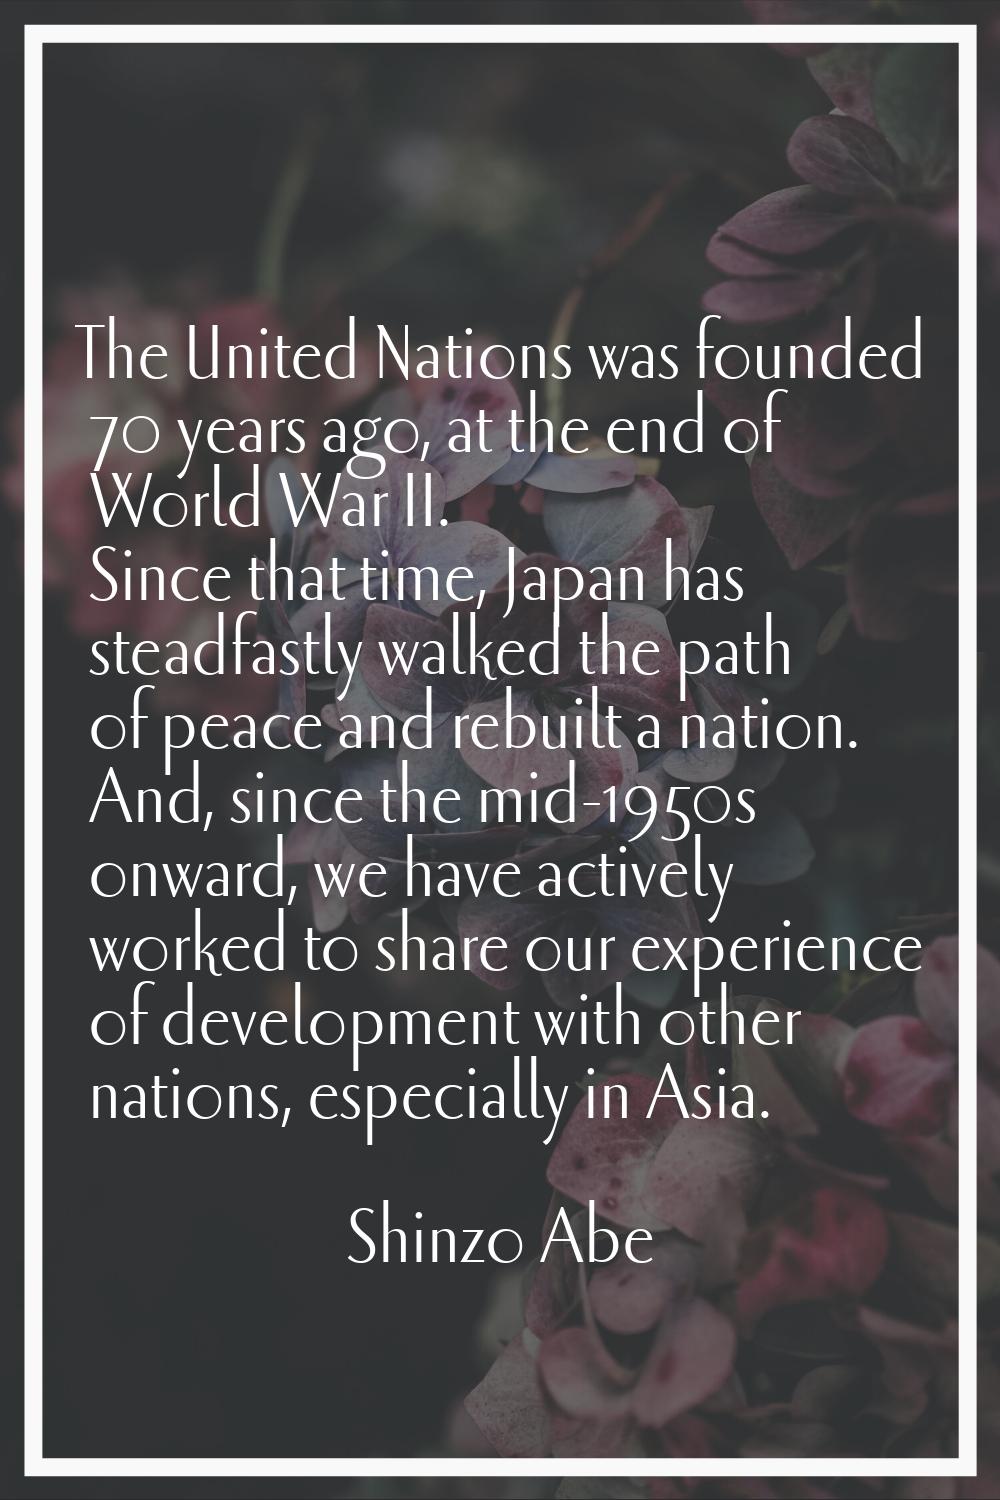 The United Nations was founded 70 years ago, at the end of World War II. Since that time, Japan has